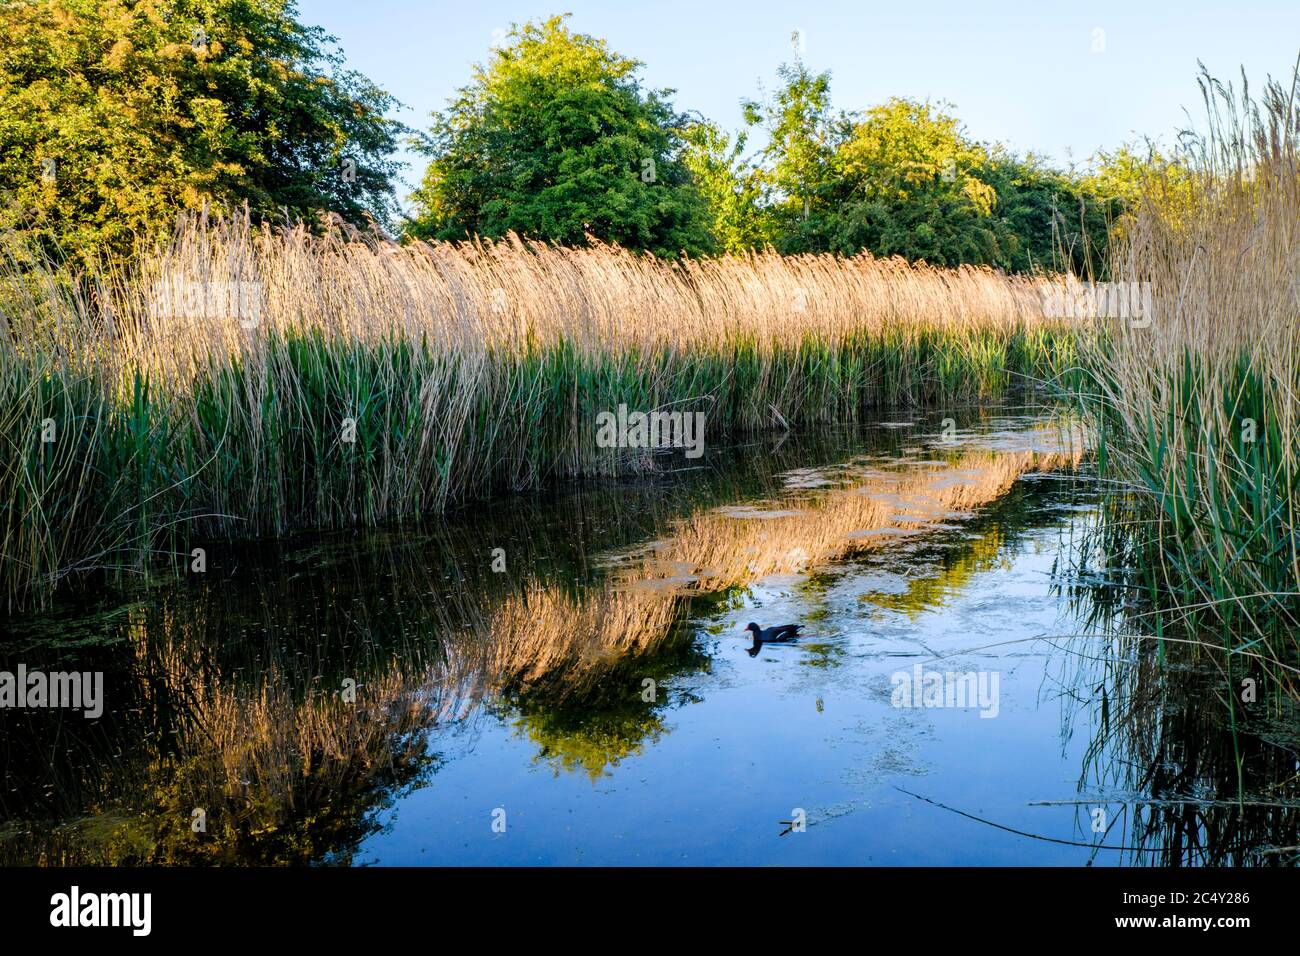 Evening sunlight on reeds and trees in late Spring on a disused section of the Grantham Canal, Gamston, West Bridgford, Nottinghamshire, England, UK Stock Photo